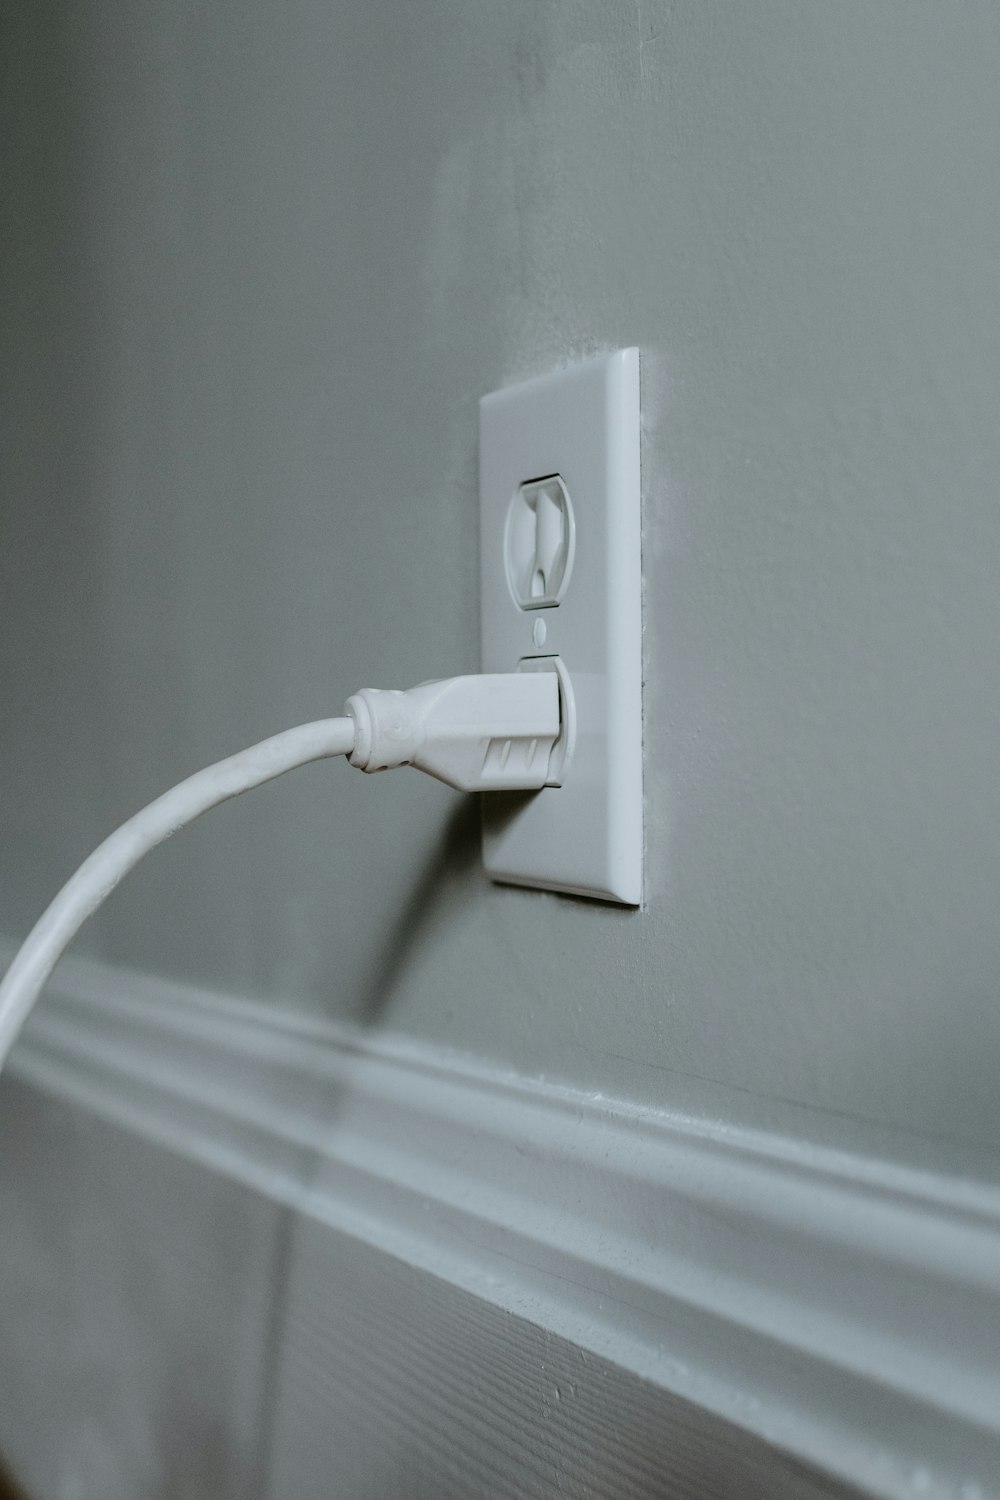 white usb cable plugged in white electric socket